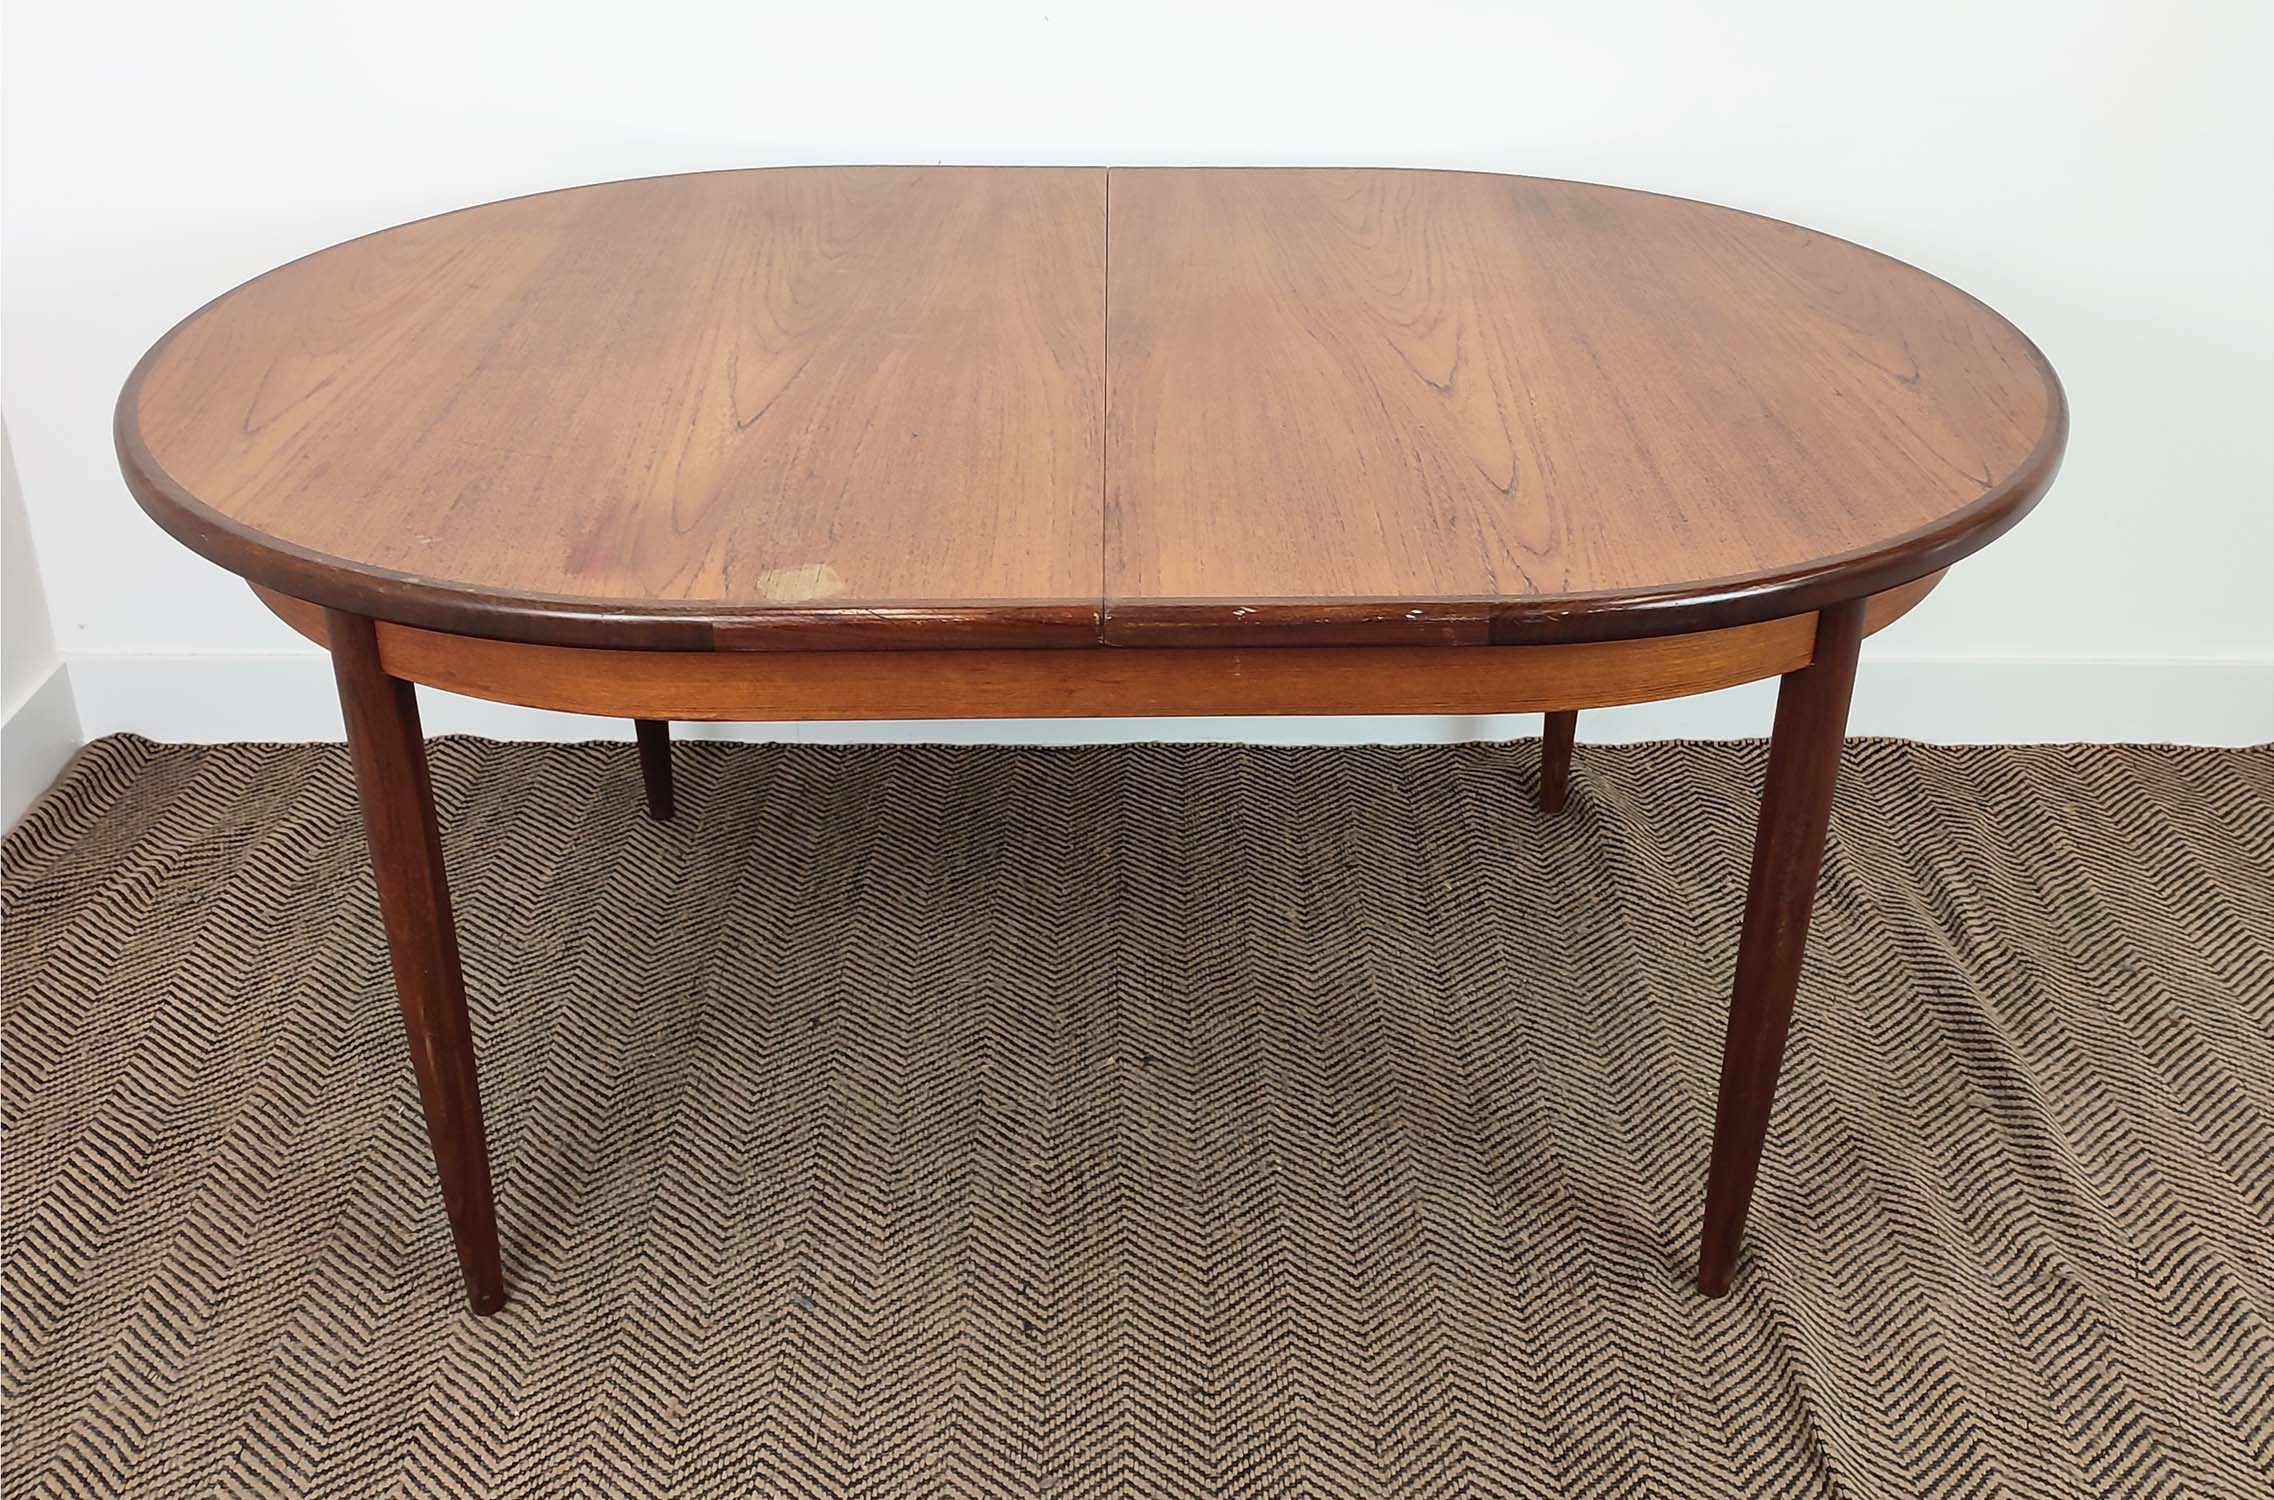 G PLAN DINING TABLE, extendable design, 209cm x 11cm x 73cm at largest. - Image 11 of 12